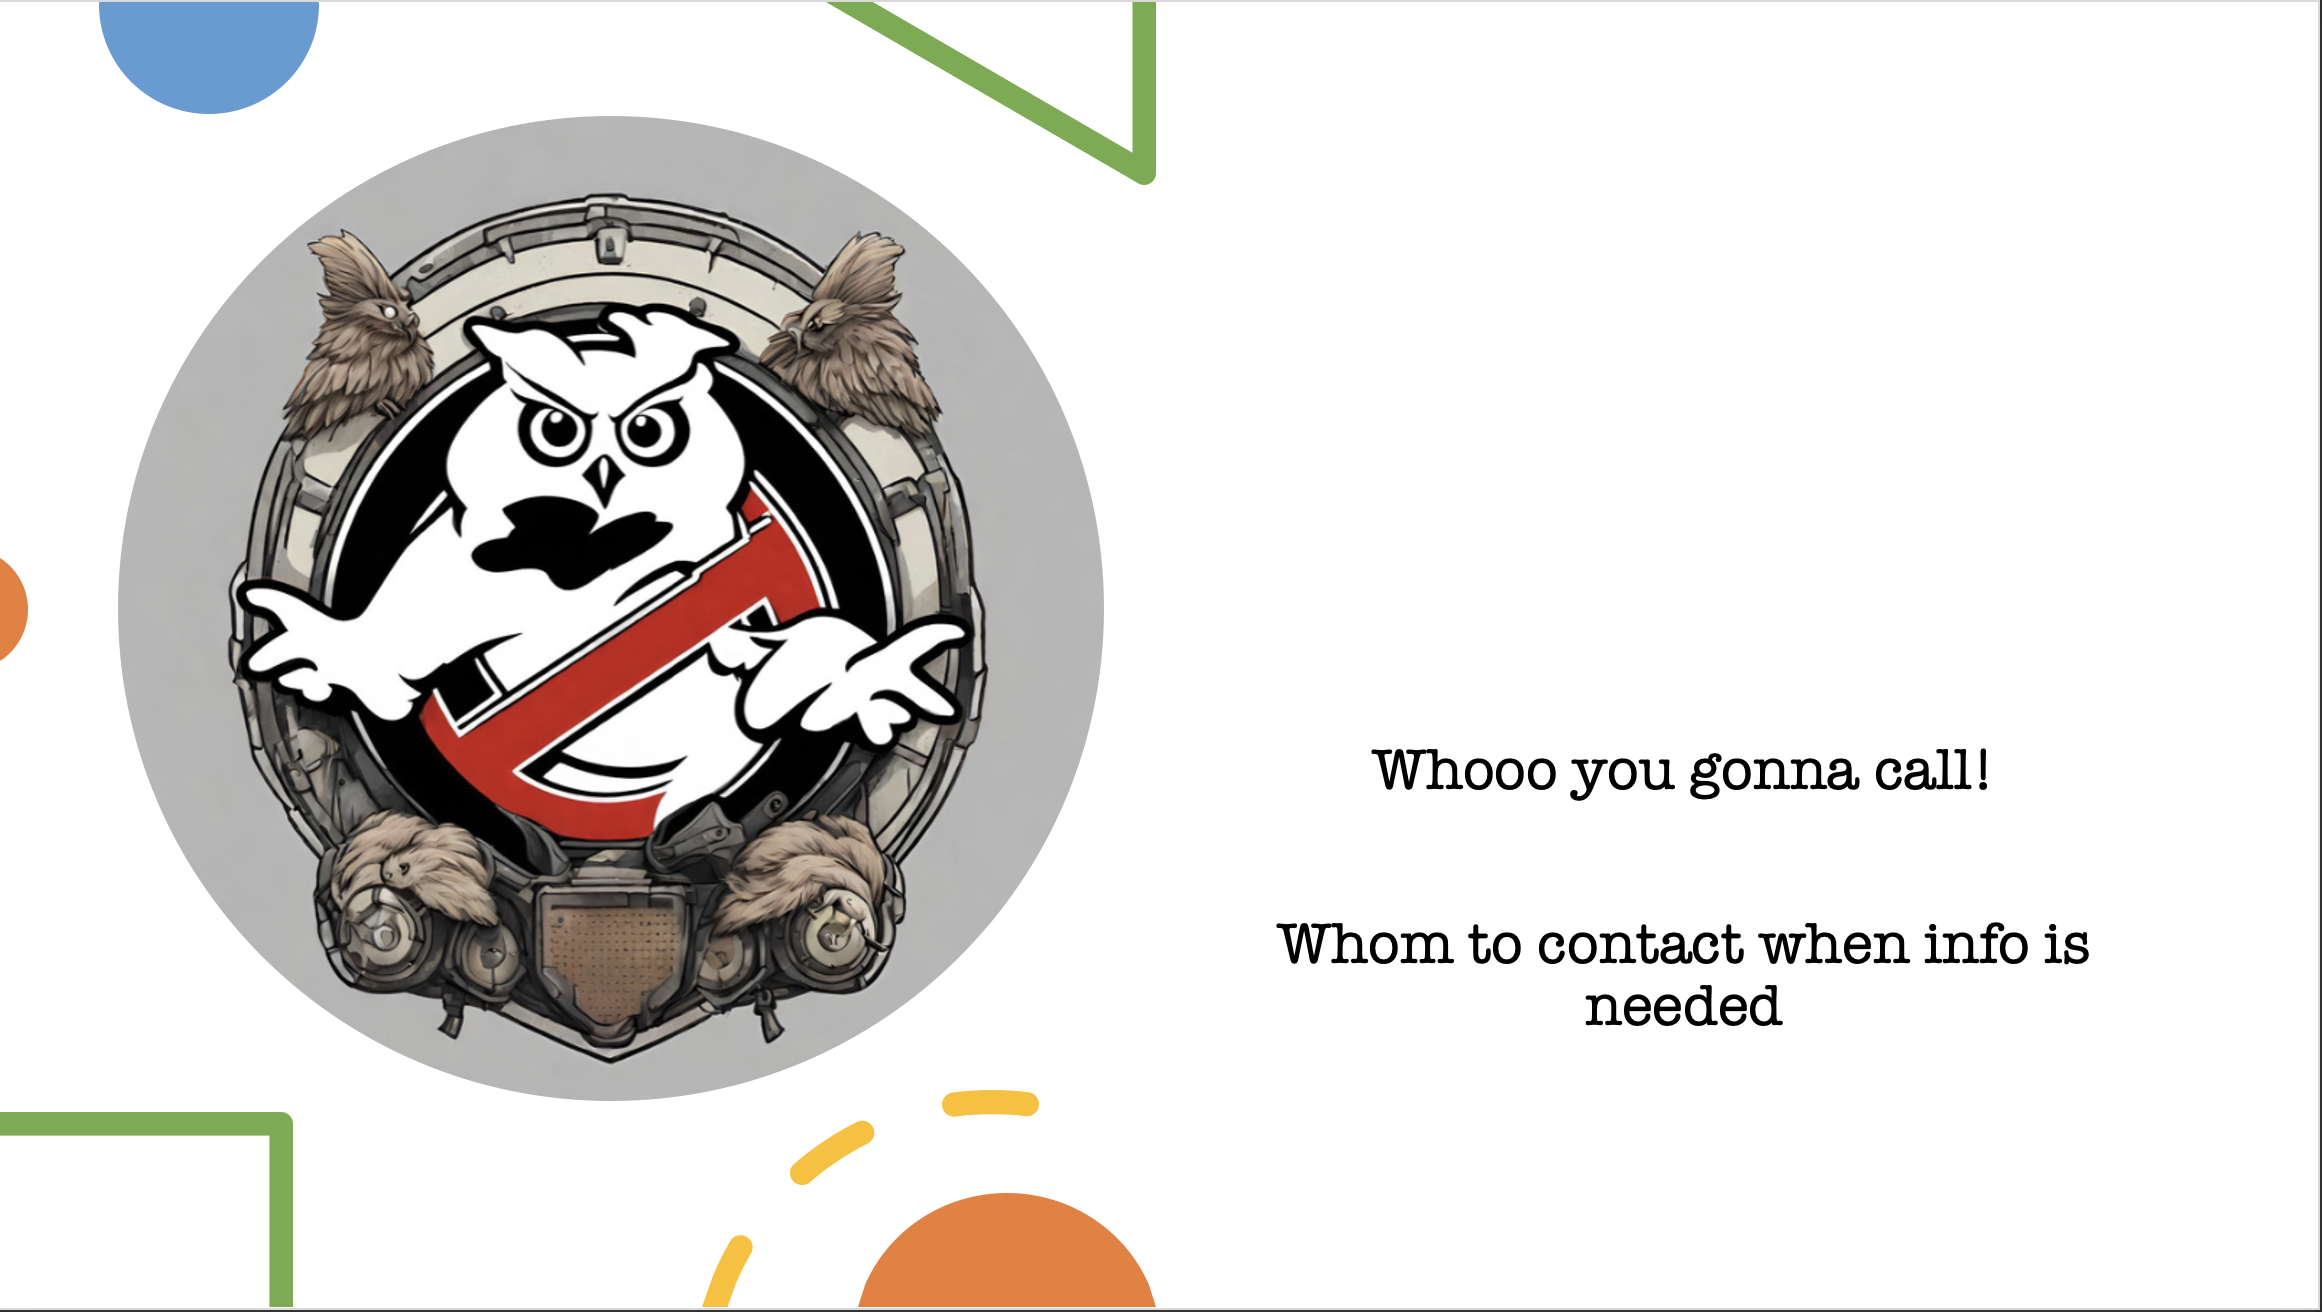 Ghostbusters insignia with owl instead. Text, "Whooo you gonna call! Whom to contact when info is needed"